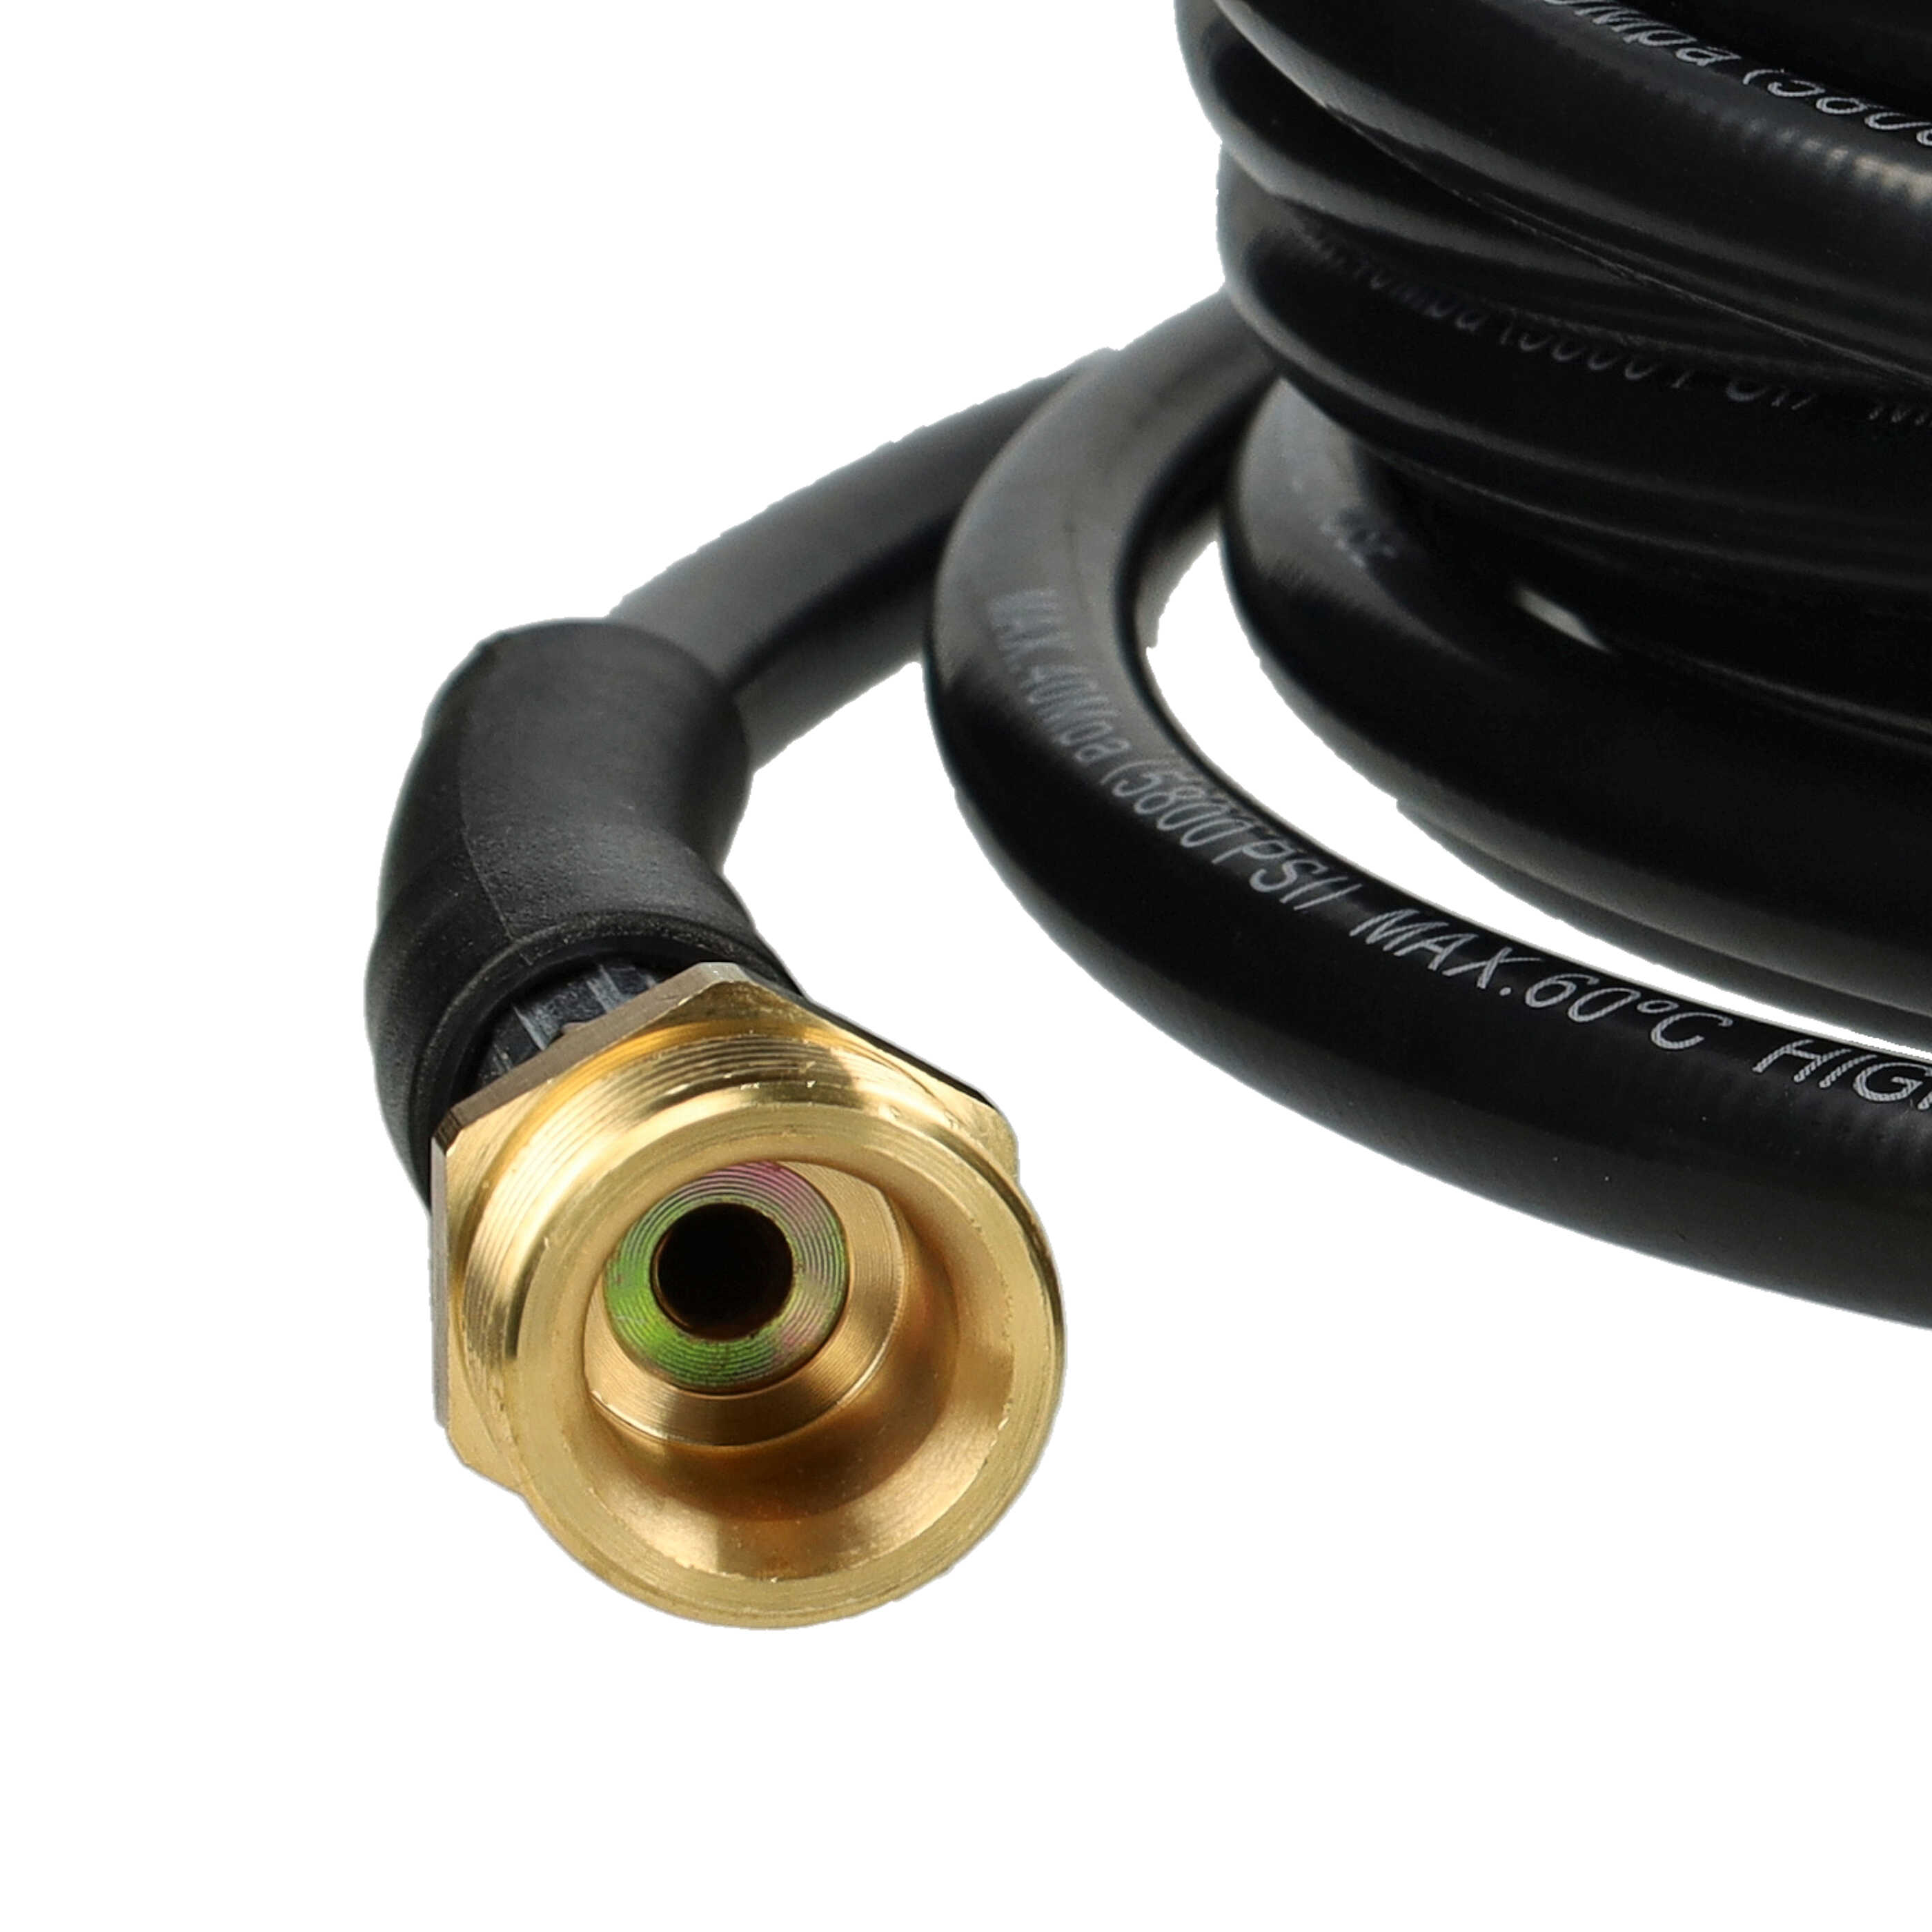 vhbw 15 m Extension Hose High-Pressure Cleaner with M22 x 1.5 Threaded Connection Black